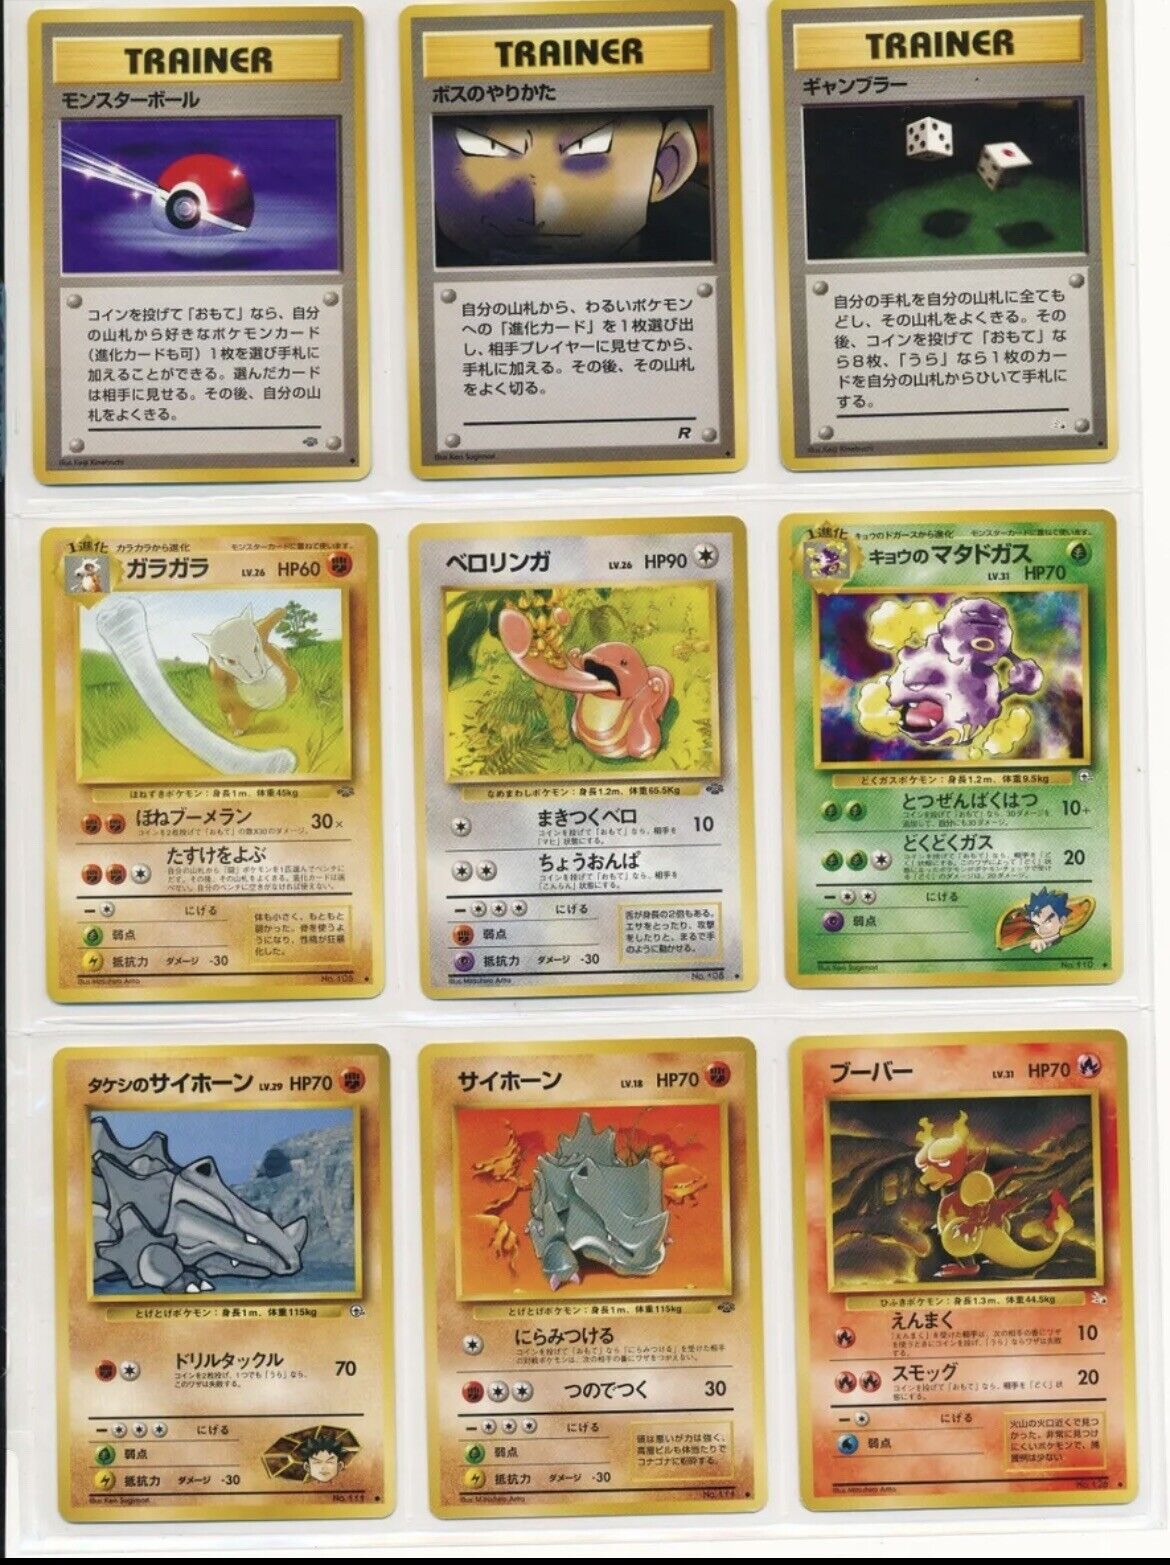 1996 Japanese Pocket Monsters Card — Mixed Lot of 9 Cards